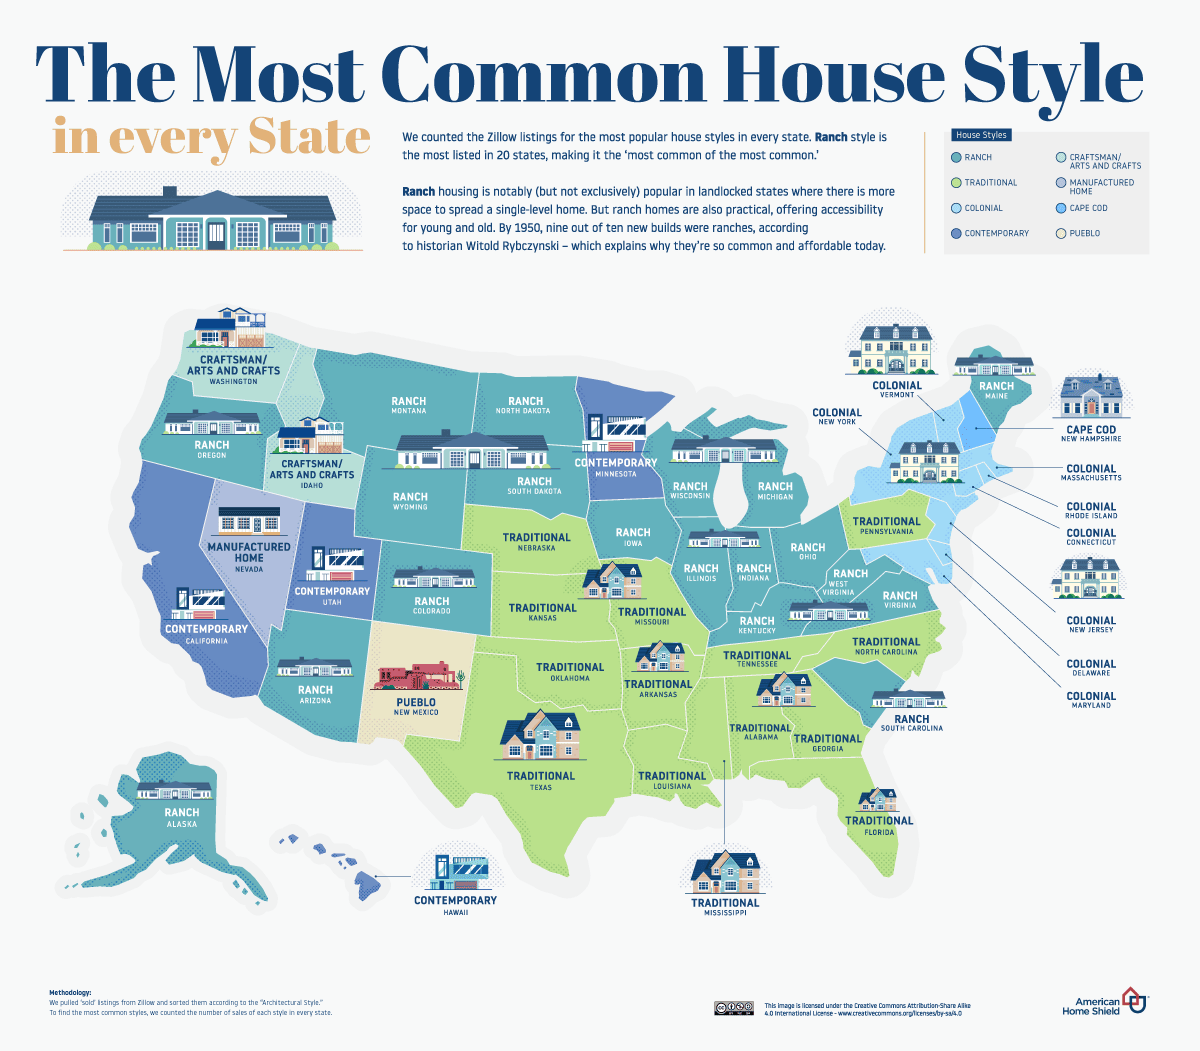 Most Common House Style in Every State